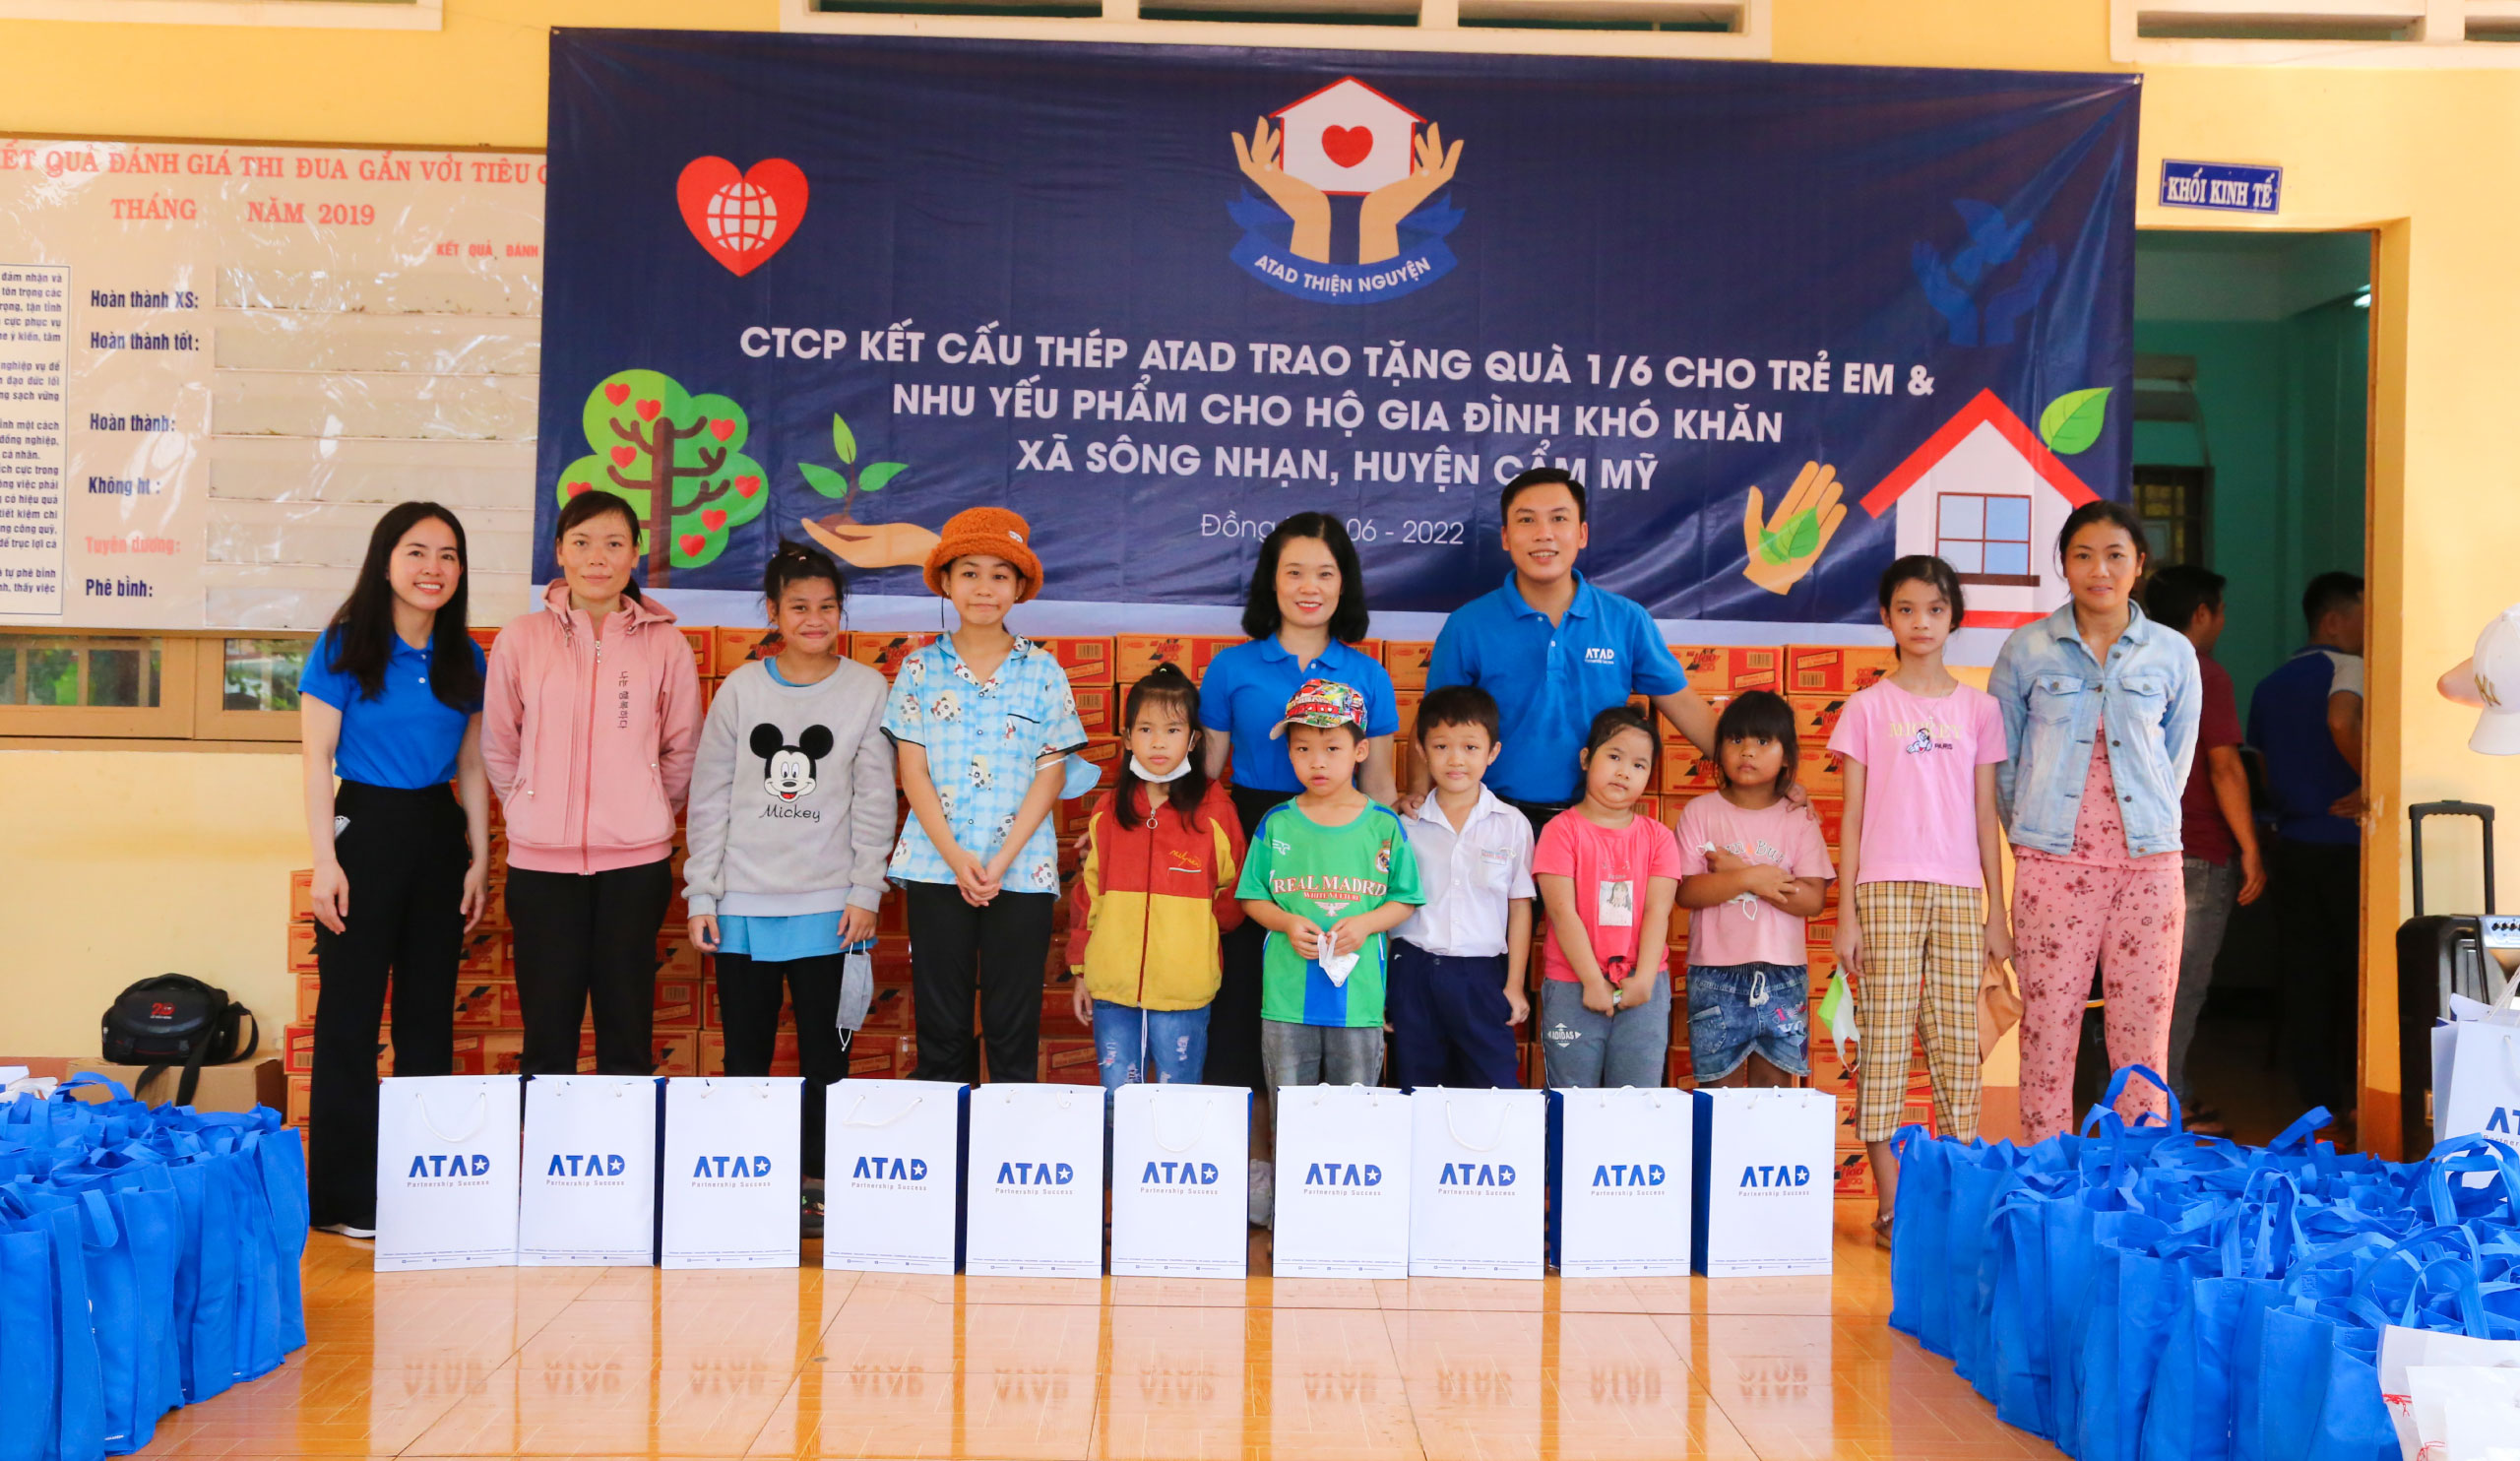 ATAD Presented Gifts For Children On International Children’s Day 1/6 & Necessities For Underprivileged Households Living In Song Nhan Village, Dong Nai Province 4